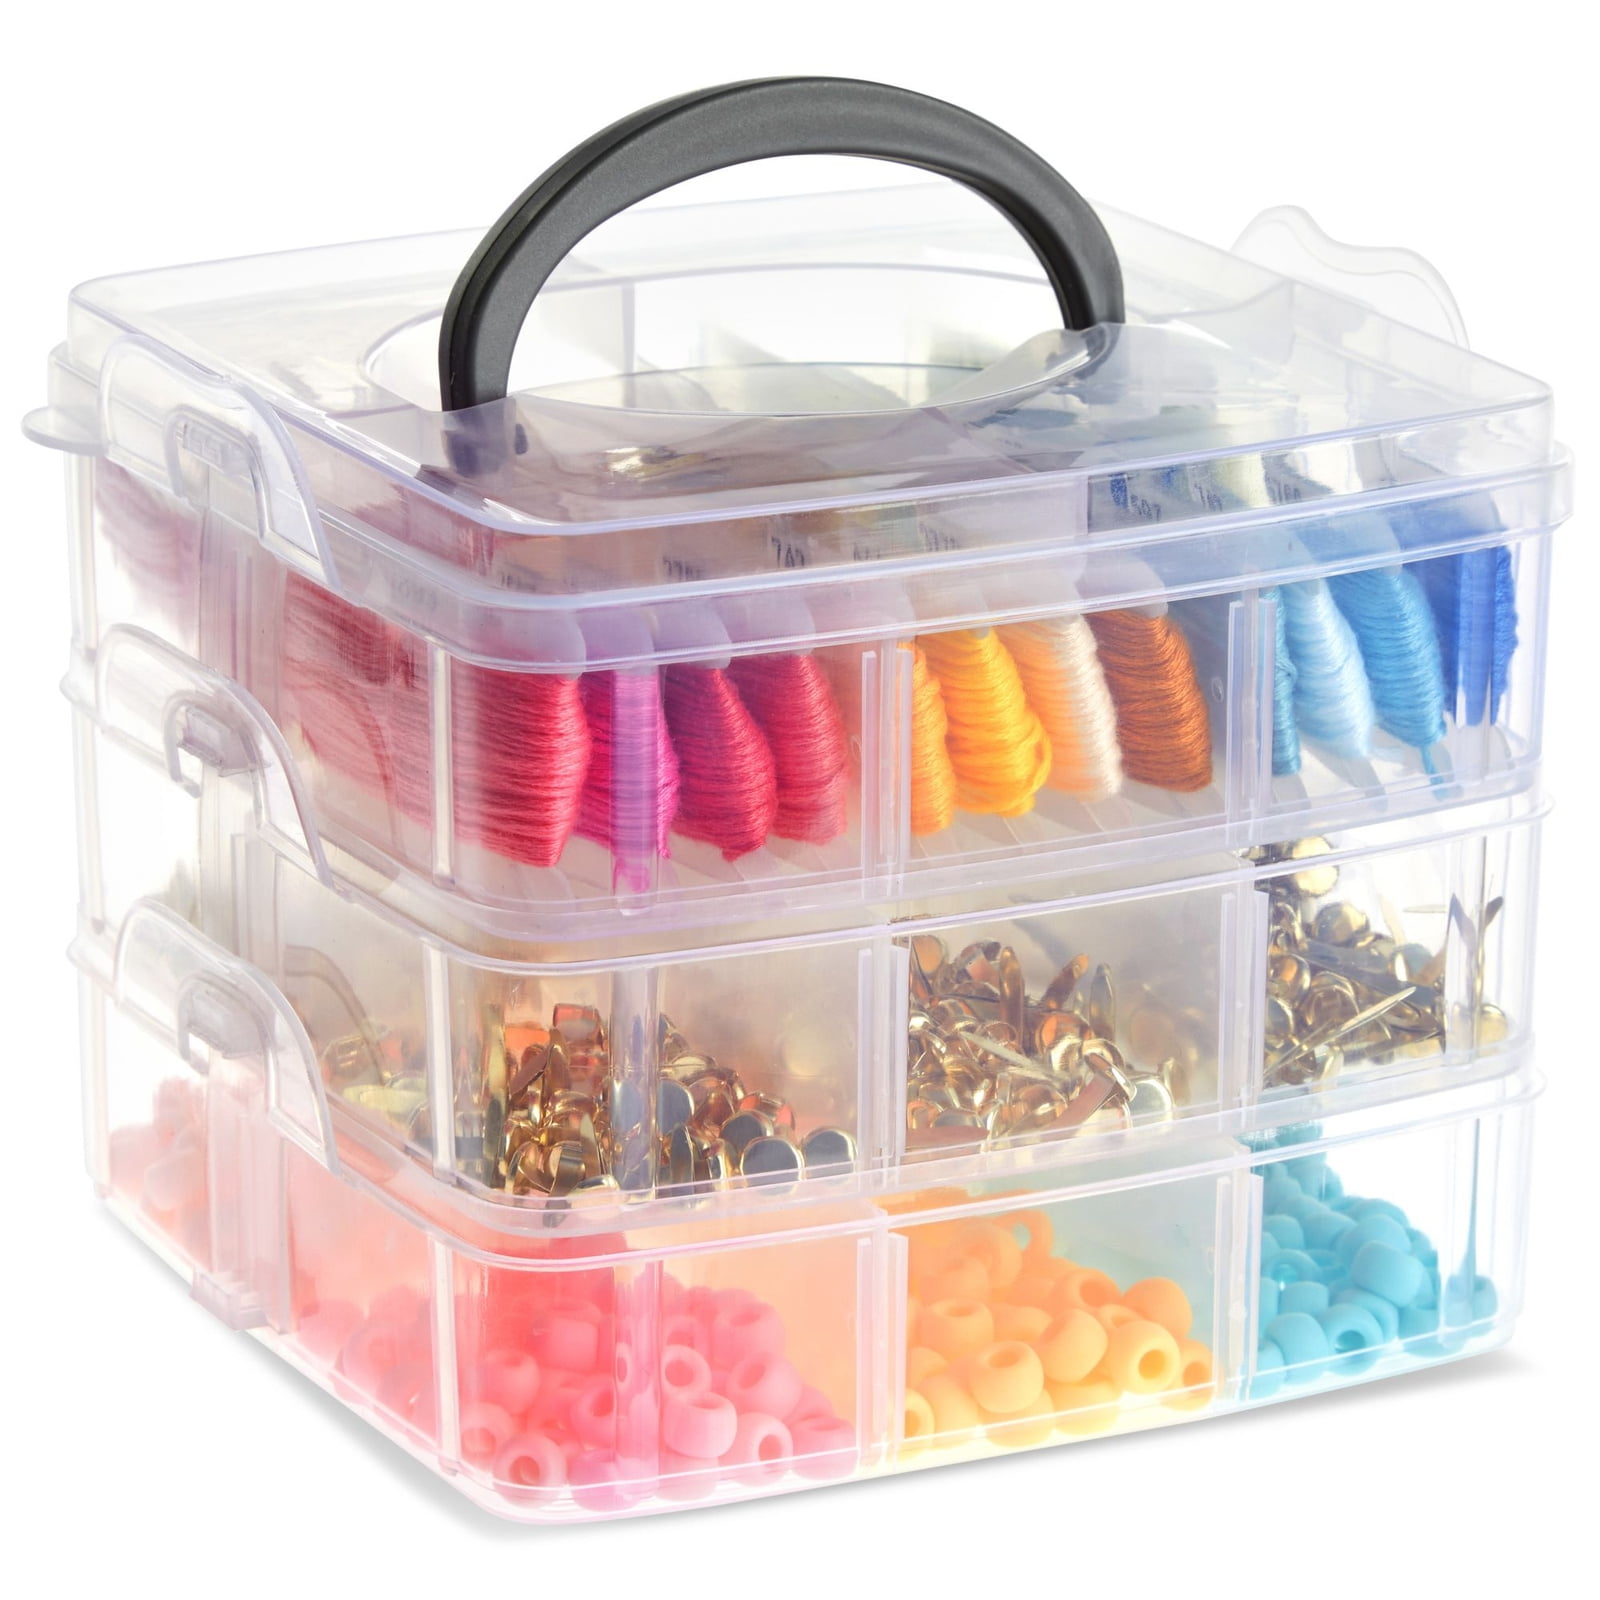 3 Tier Stackable Storage Containers with Adjustable Compartments